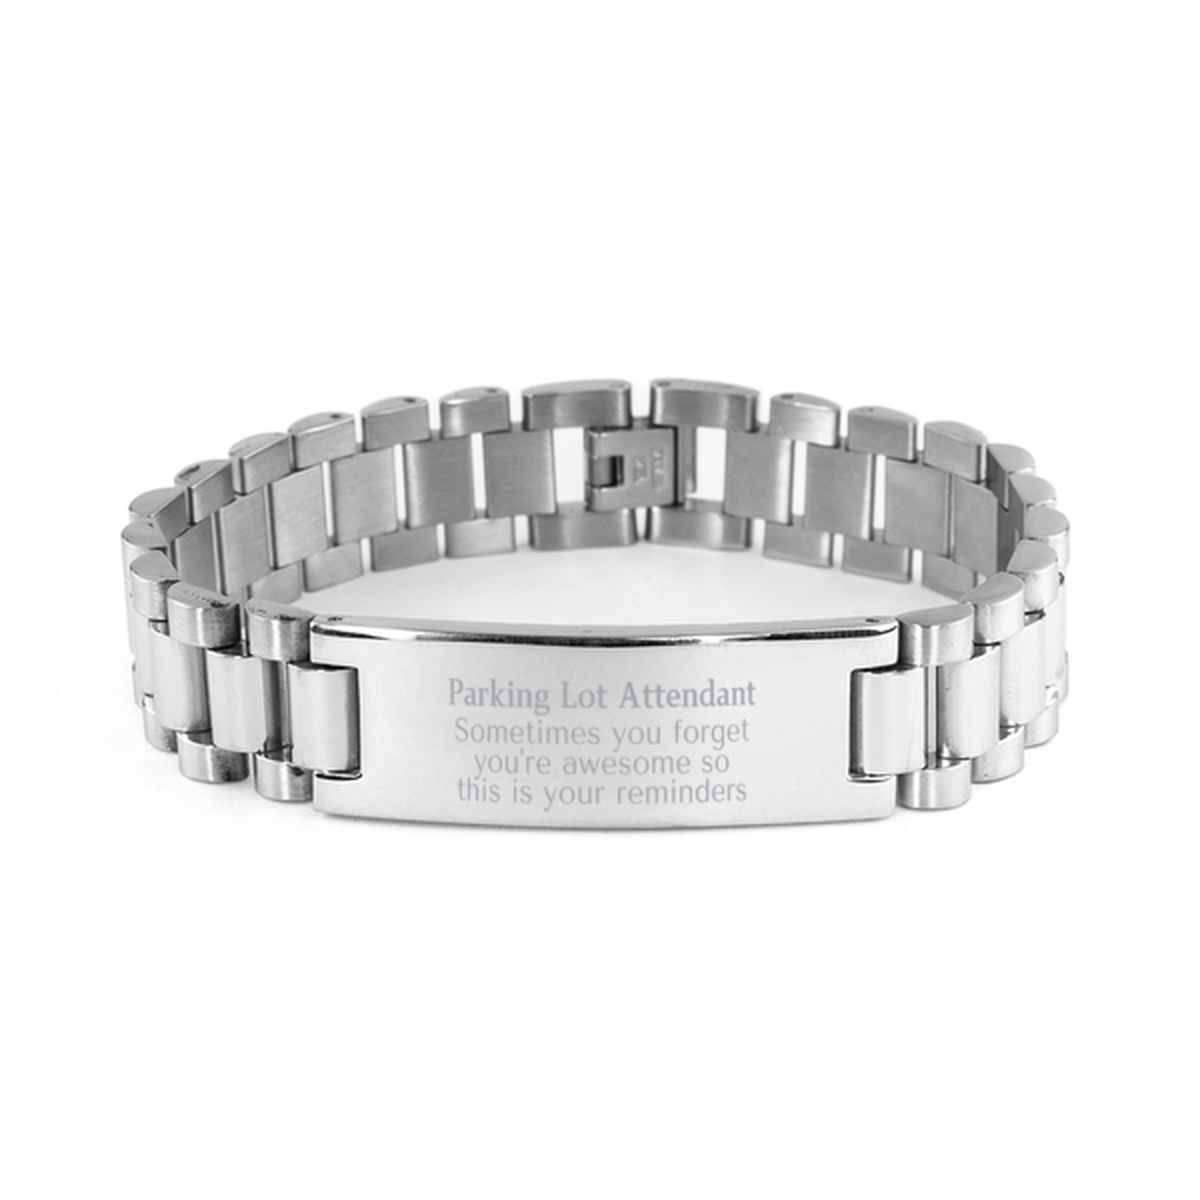 Sentimental Parking Lot Attendant Ladder Stainless Steel Bracelet, Parking Lot Attendant Sometimes you forget you're awesome so this is your reminders, Graduation Christmas Birthday Gifts for Parking Lot Attendant, Men, Women, Coworkers